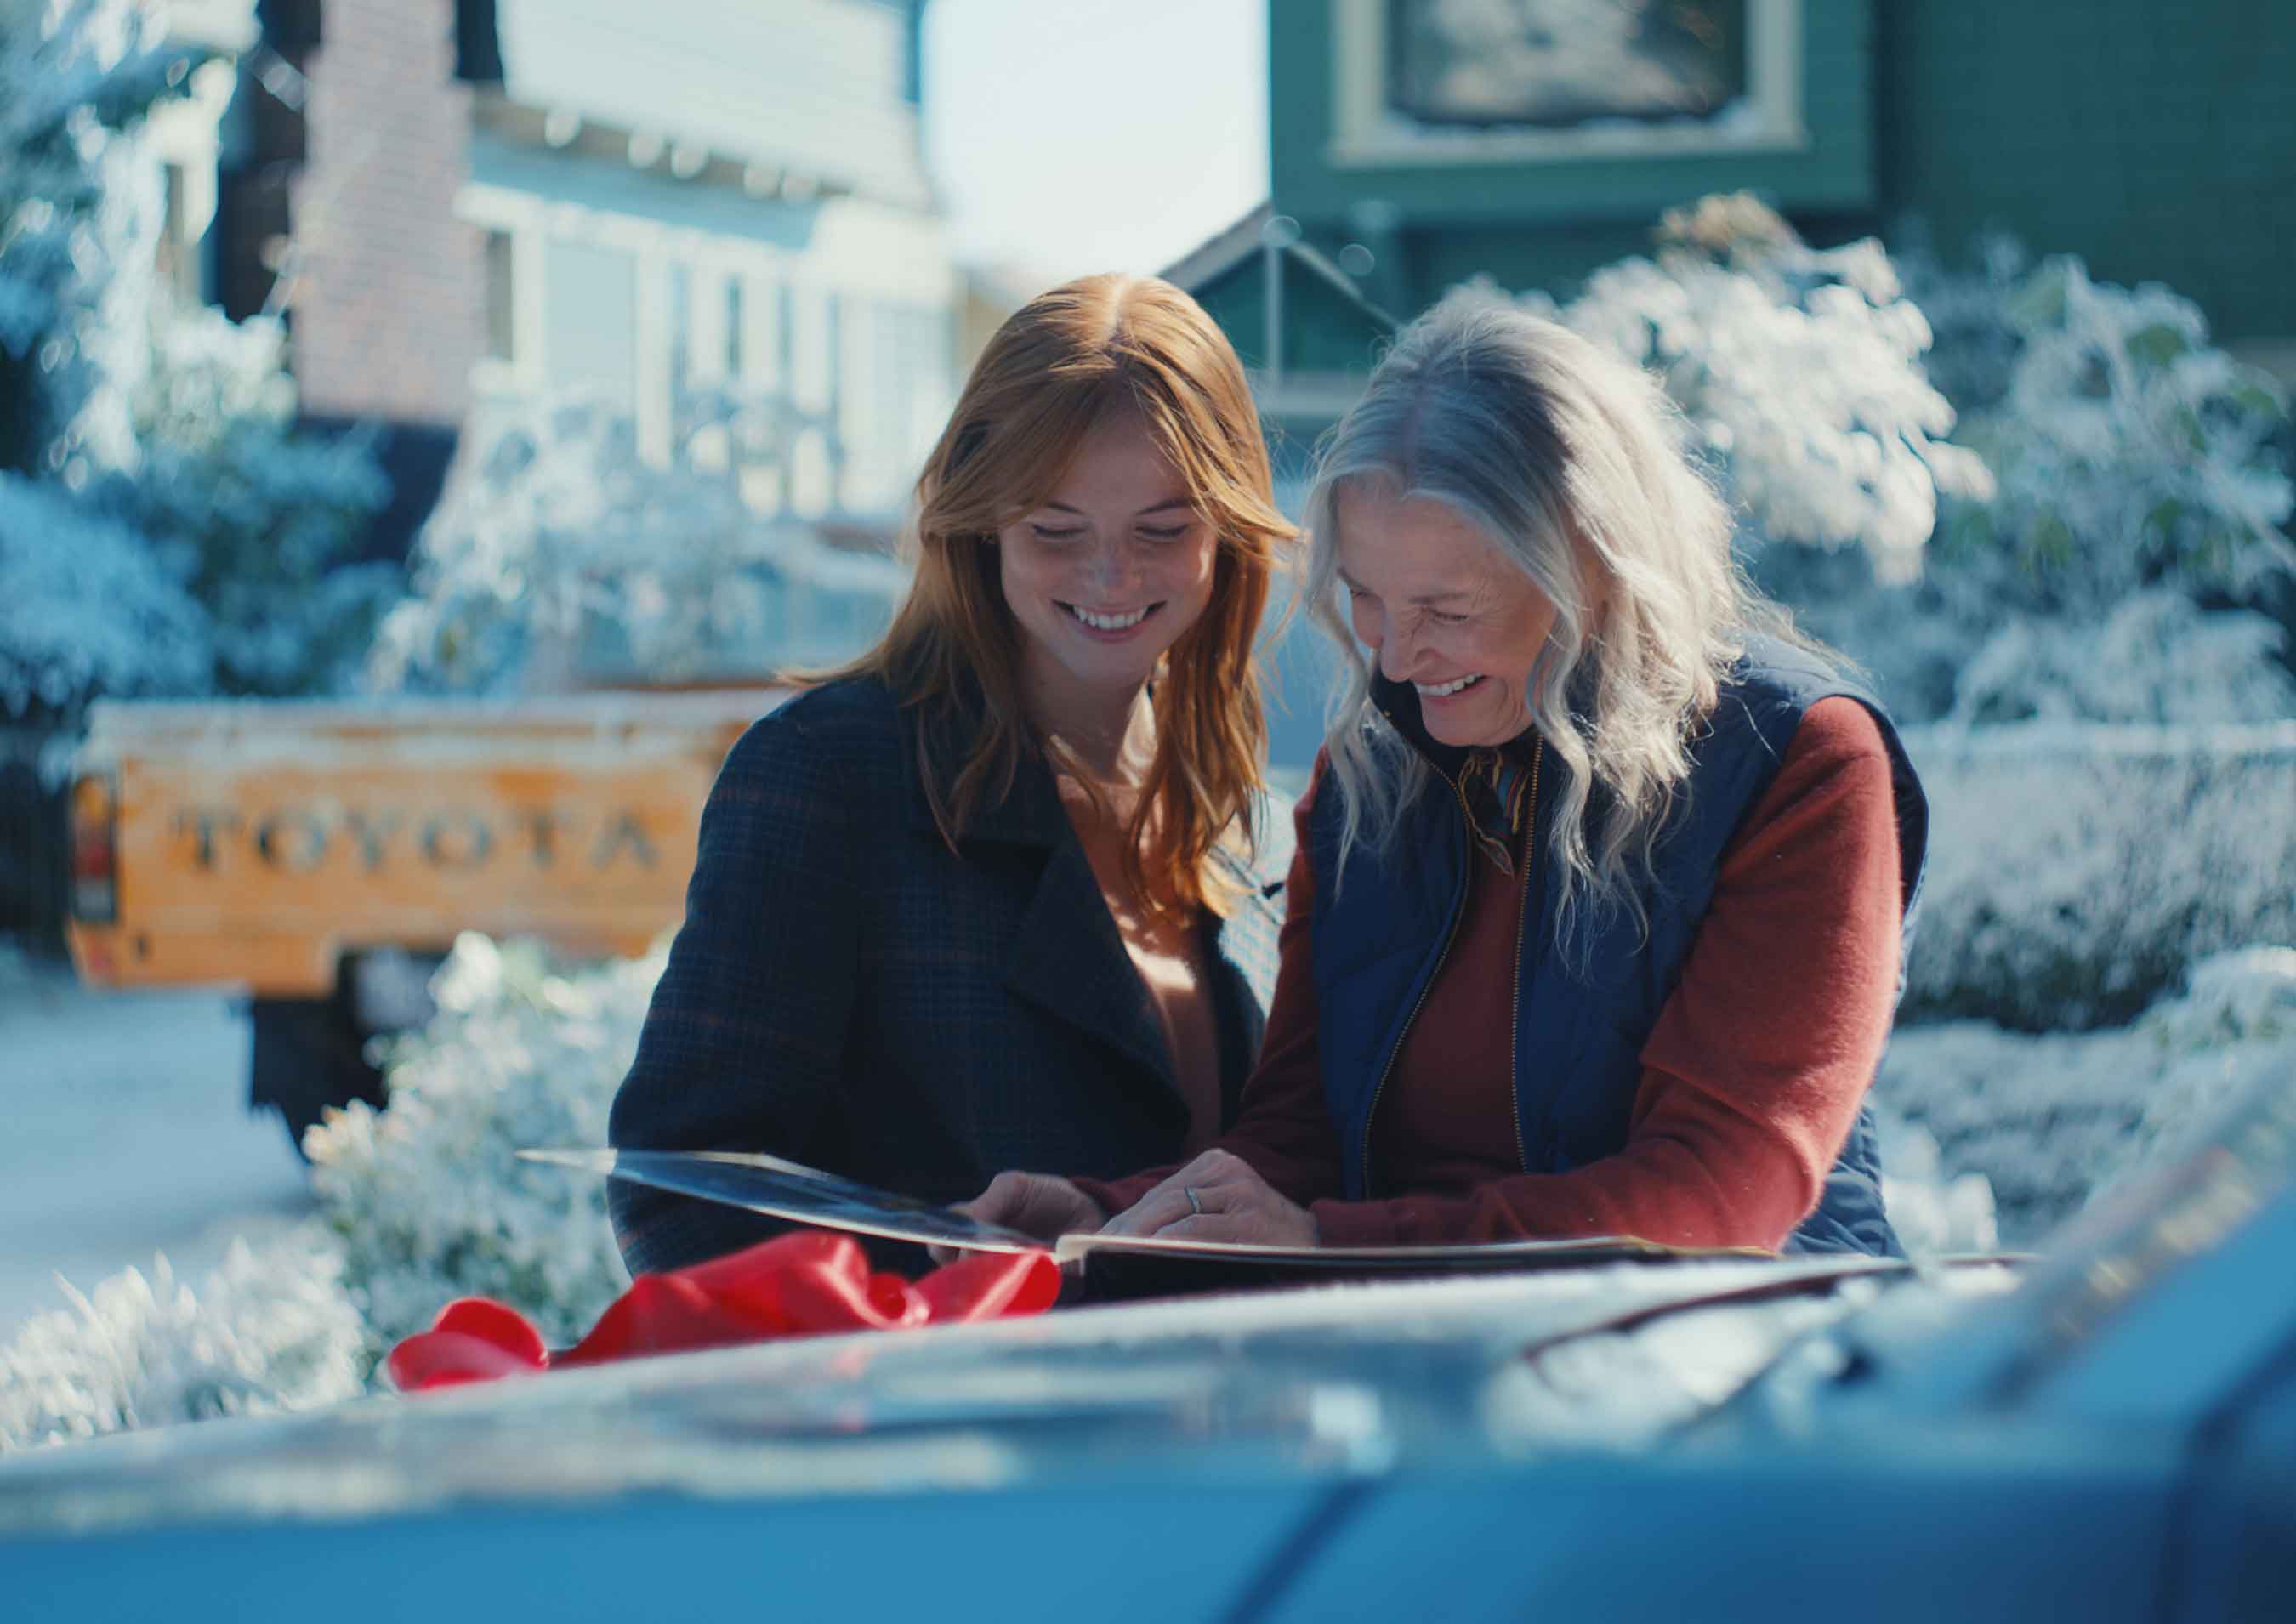 Toyota’s new spot “Present from the Past” focuses on spreading joy and bringing loved ones together this holiday season.